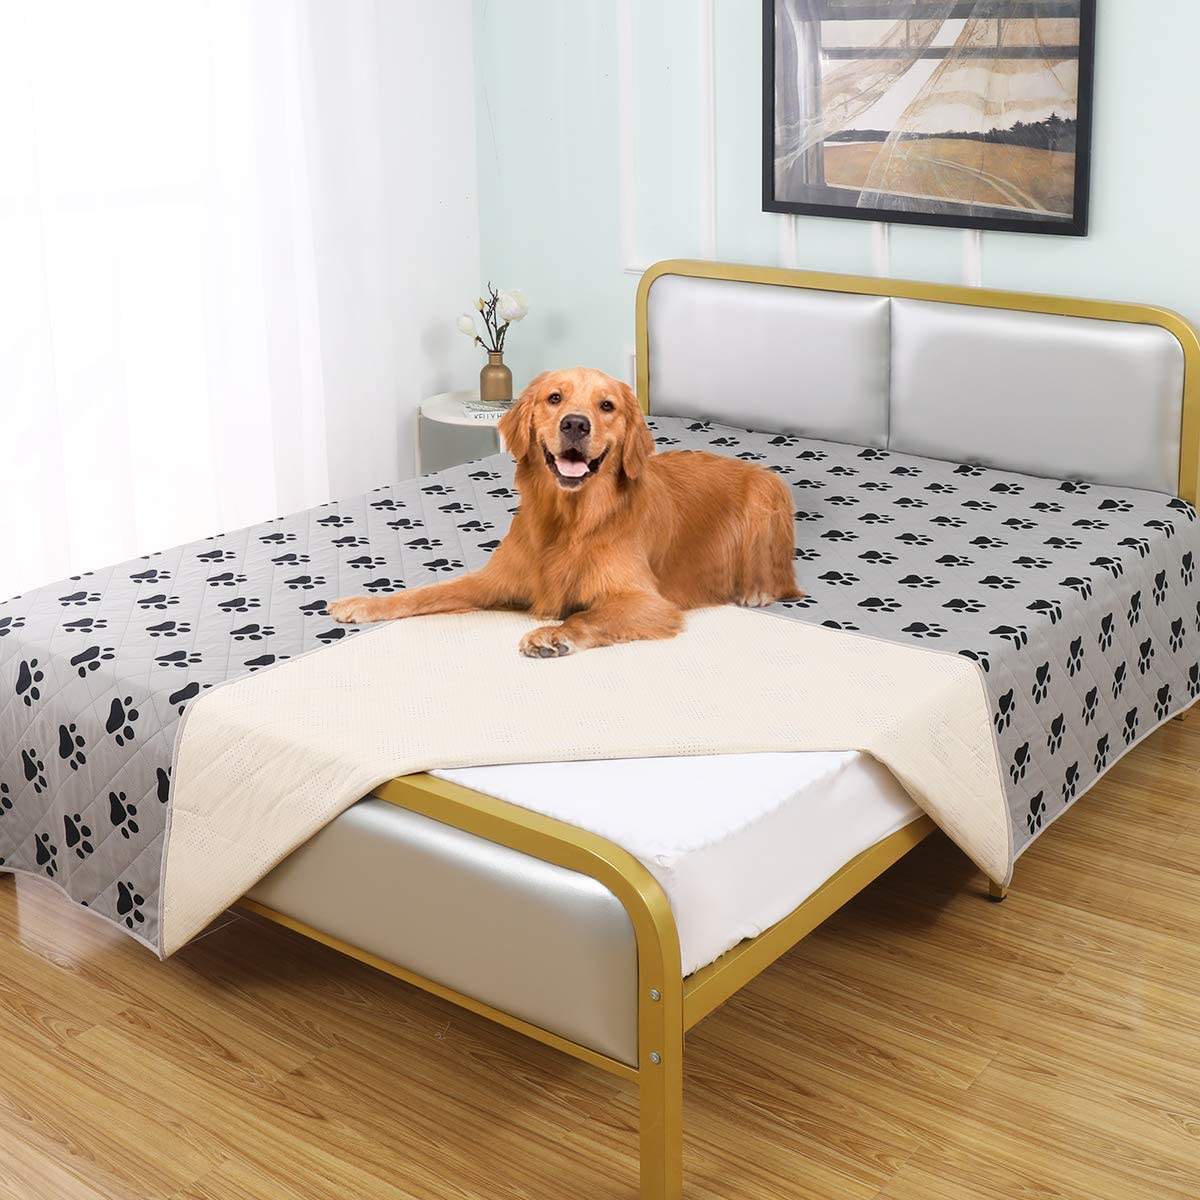 Dog Bed Covers Dog Rugs Pet Pads Puppy Pads Washable Pee Pads for